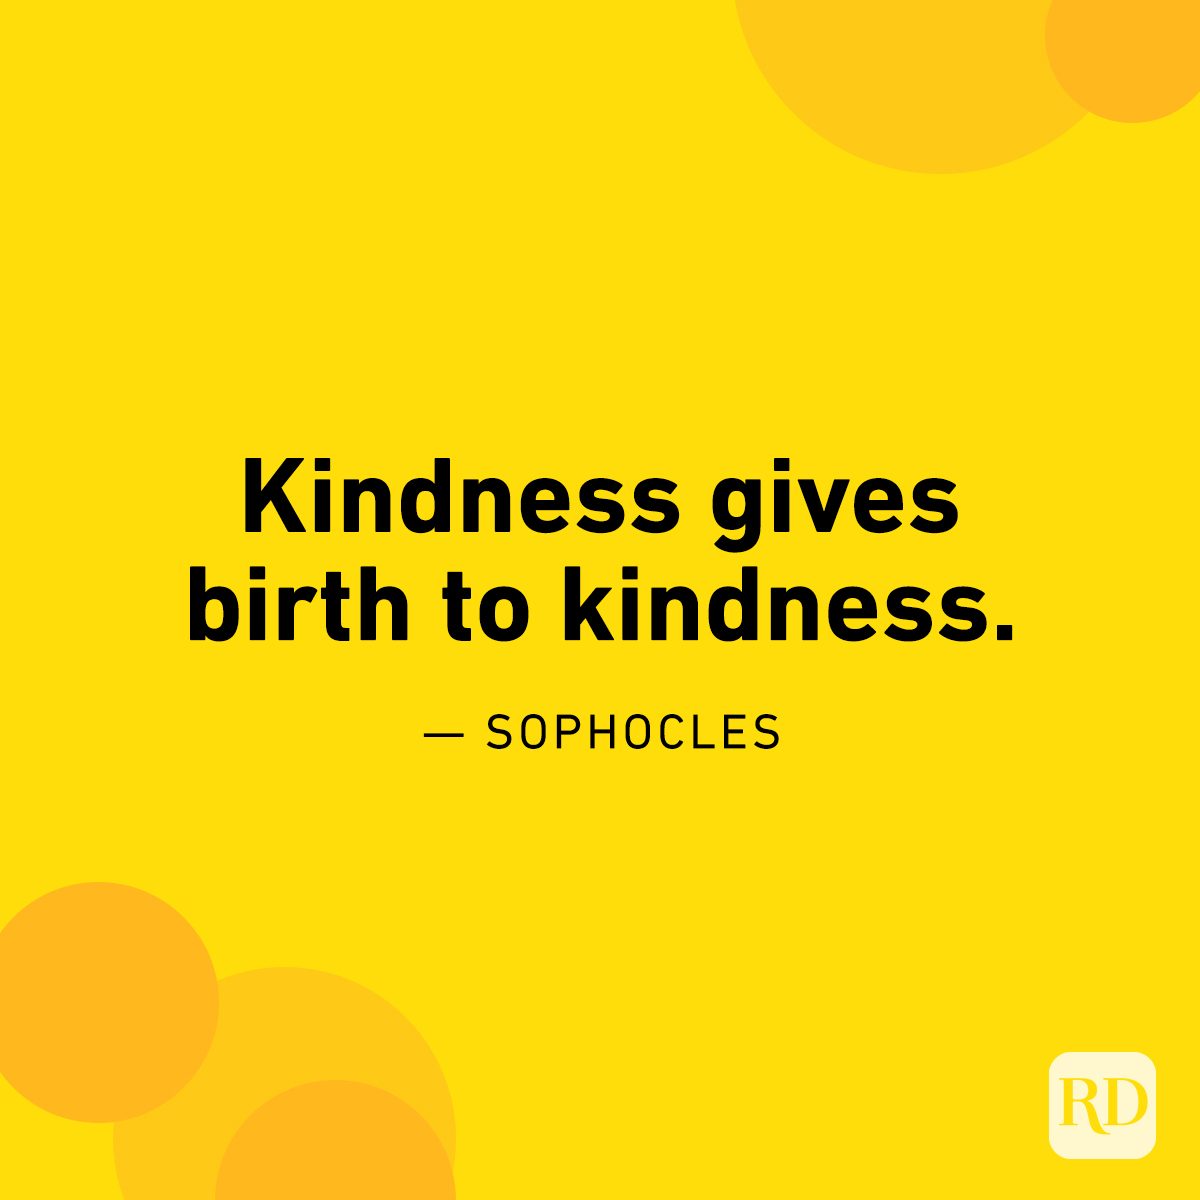 60 Kindness Quotes and Sayings | Quotes About Kindness